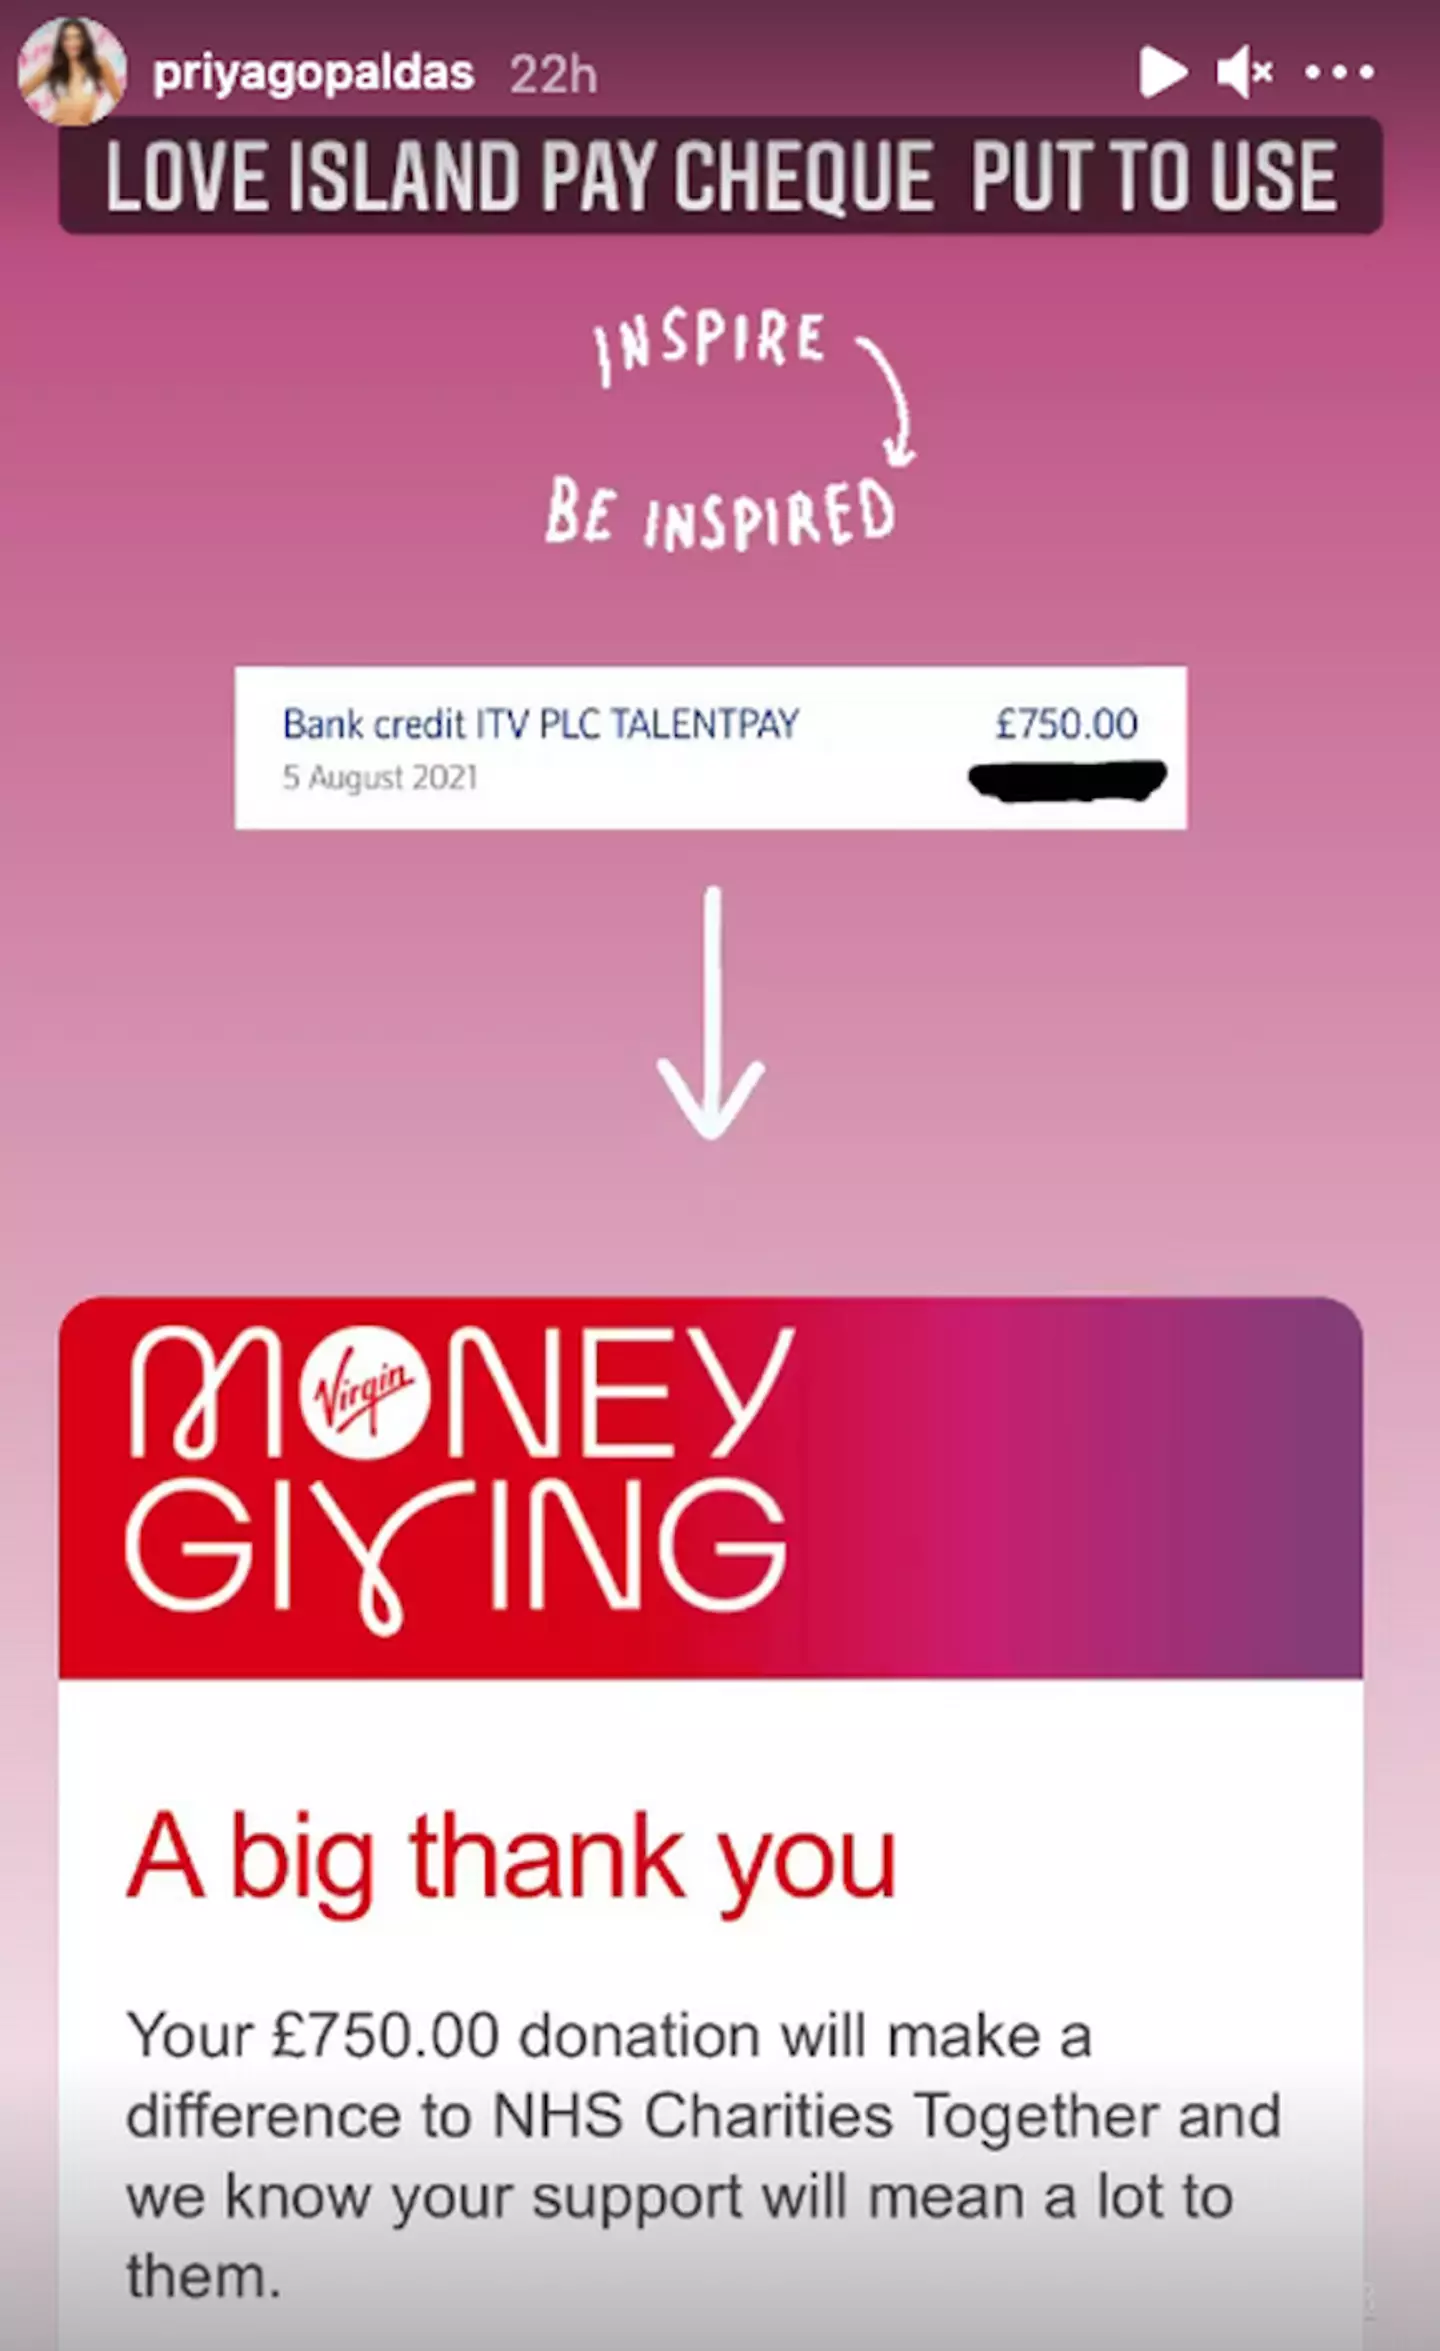 Priya donated her entire Love Island pay cheque to charity (